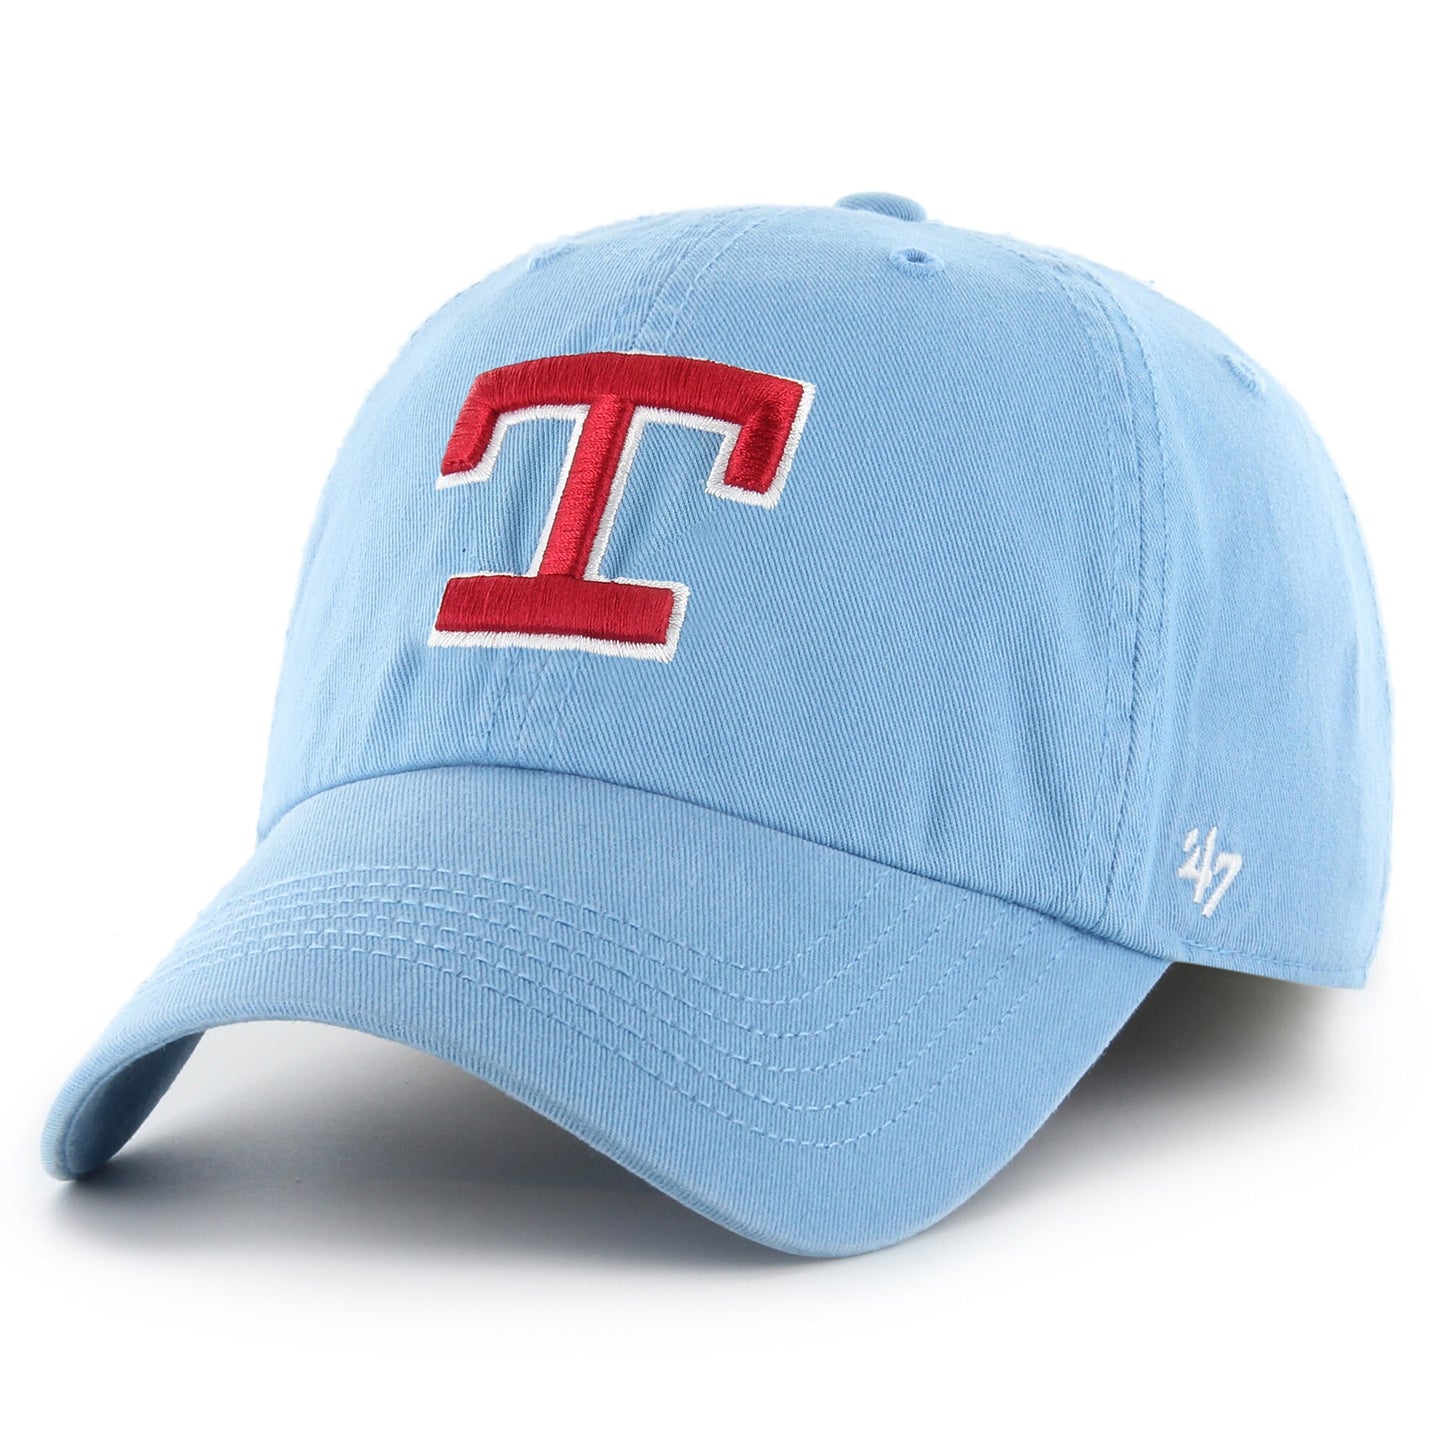 Texas Rangers '47 Cooperstown Collection Franchise Fitted Hat - Light Blue